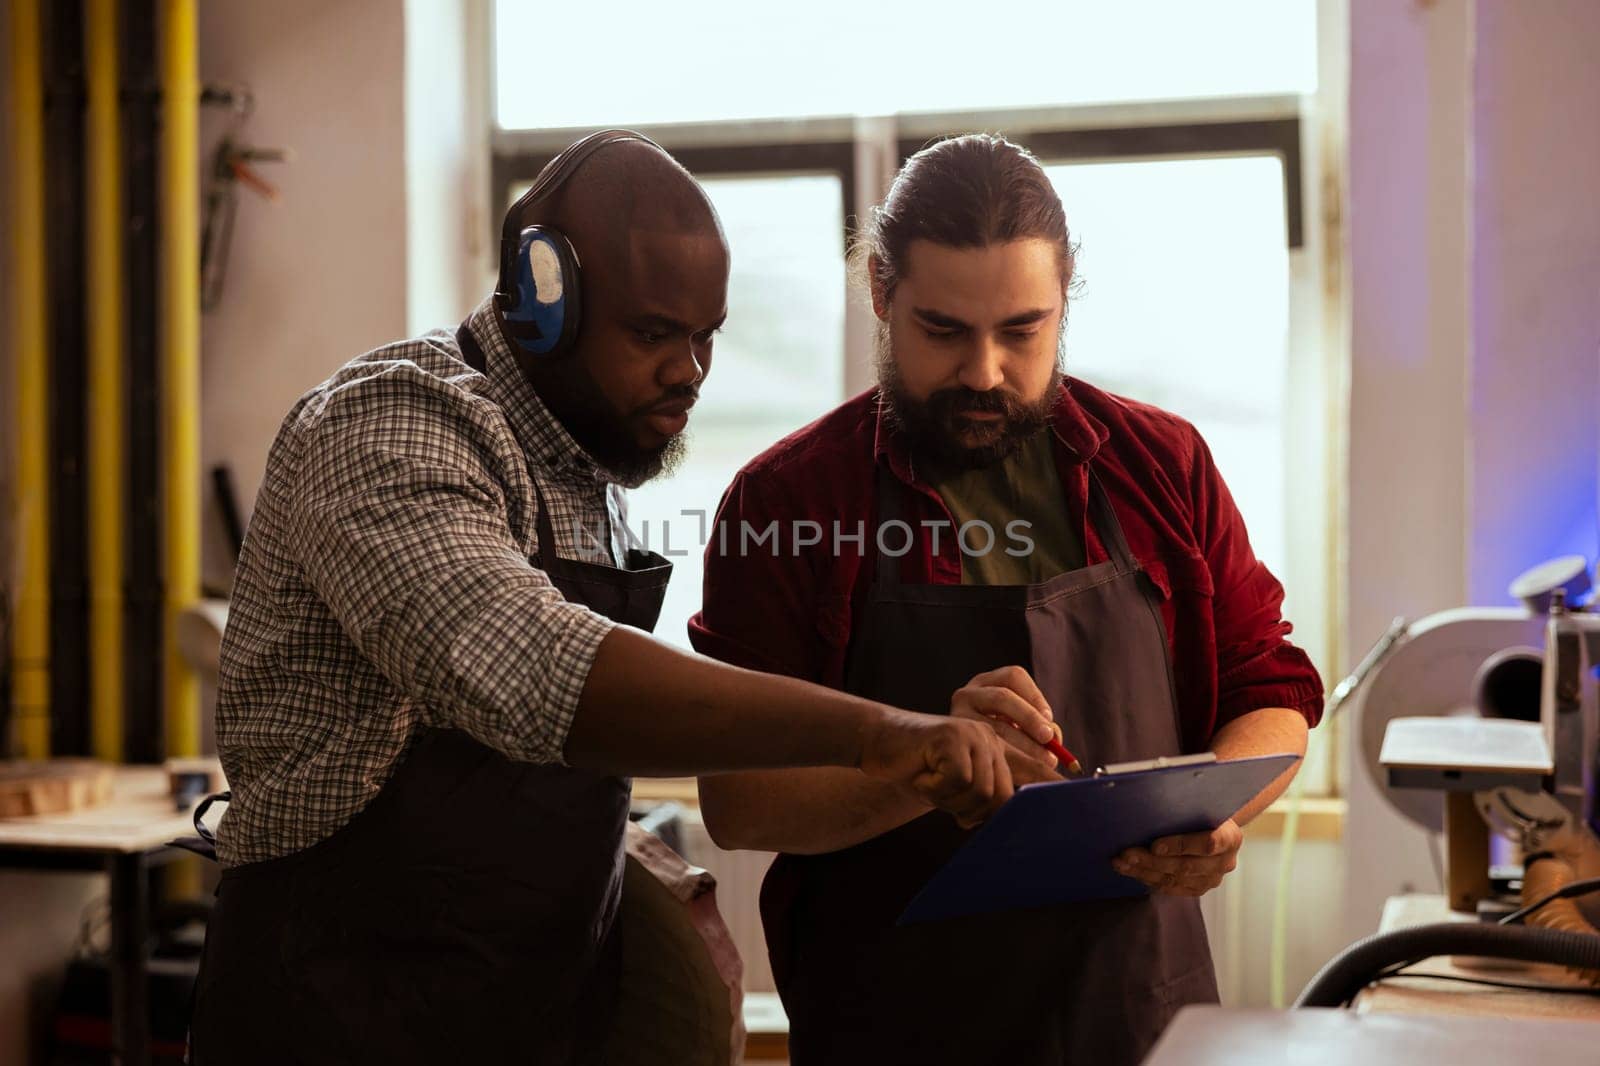 Carpenter and coworker looking over technical drawings on notepad to make creative wood art pieces. Artisan and african american man looking at blueprints to execute woodworking projects